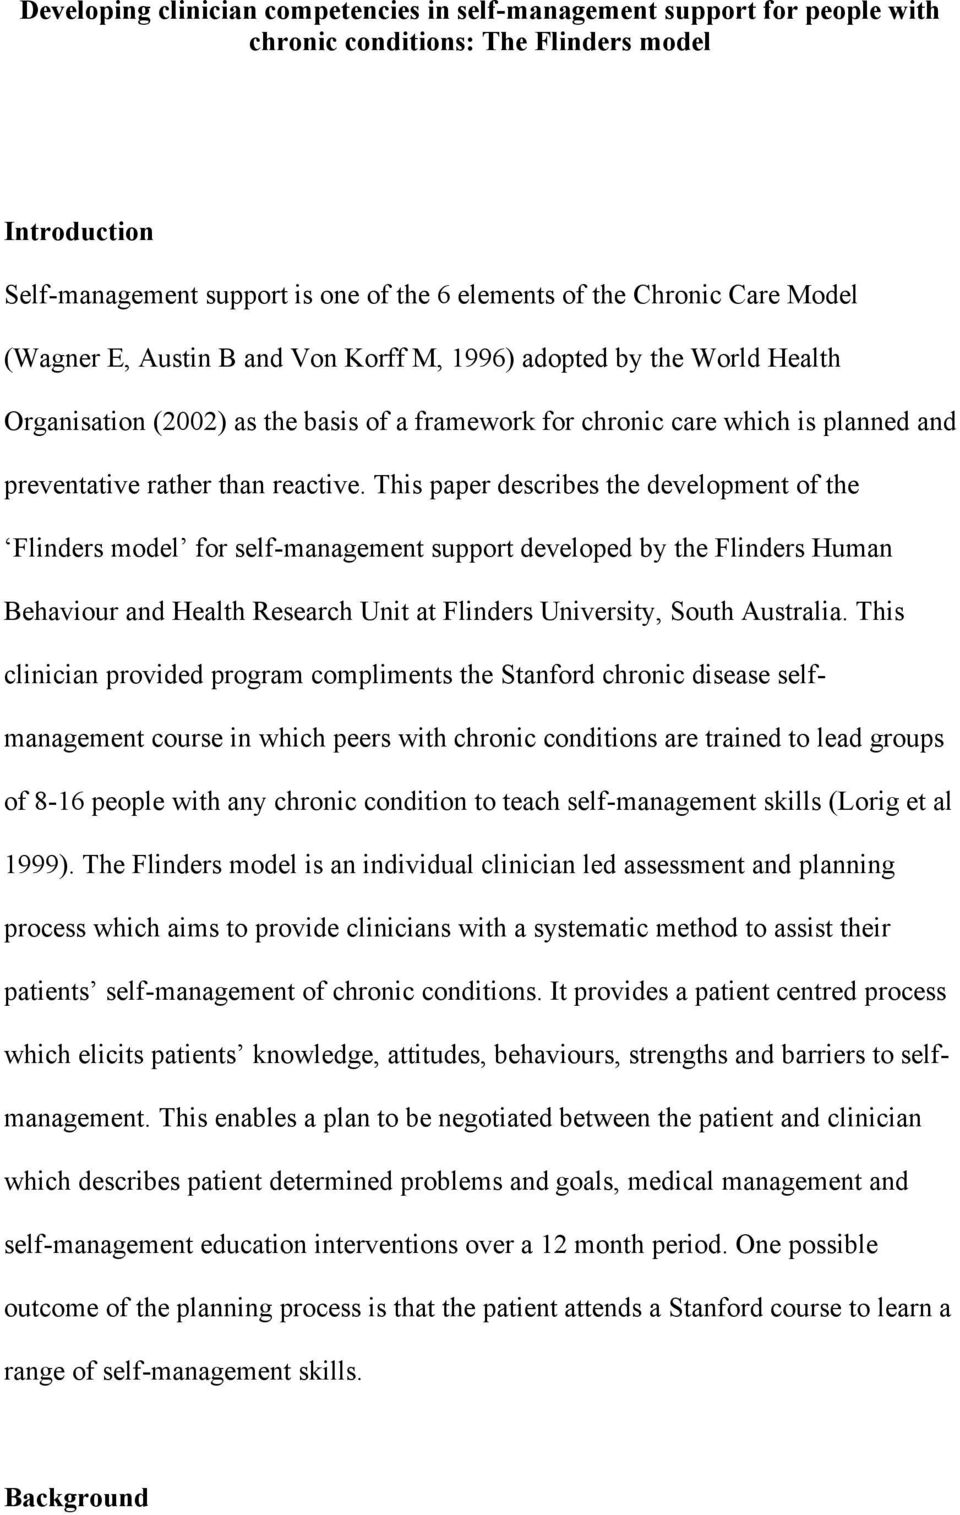 This paper describes the development of the Flinders model for self-management support developed by the Flinders Human Behaviour and Health Research Unit at Flinders University, South Australia.